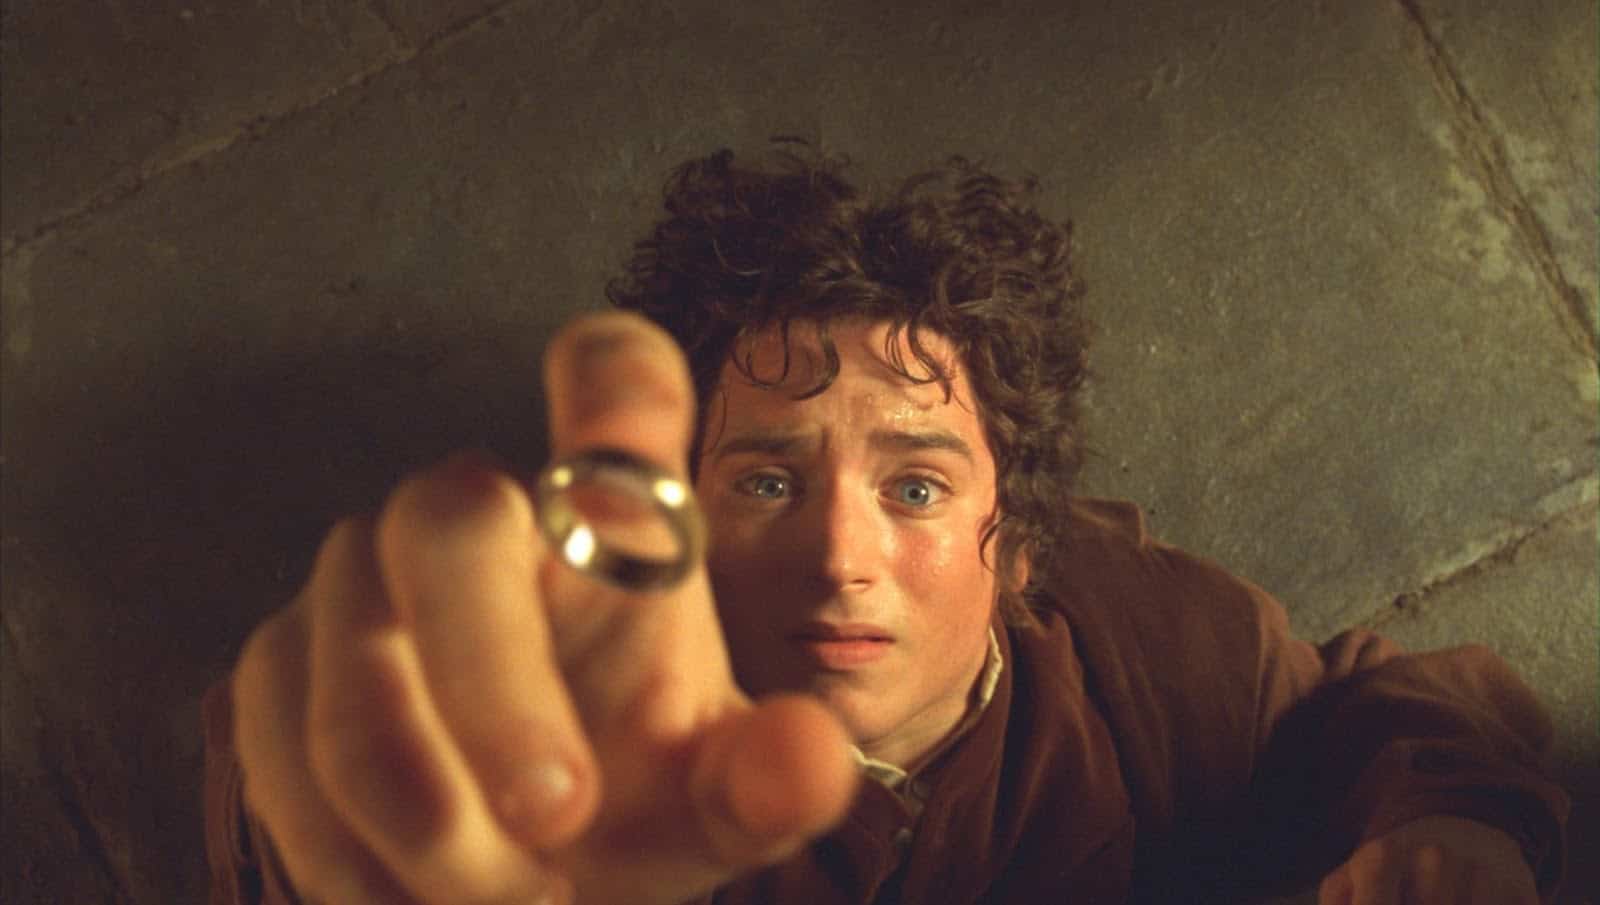 Frodo catching a ring on his finger while lying on the floor